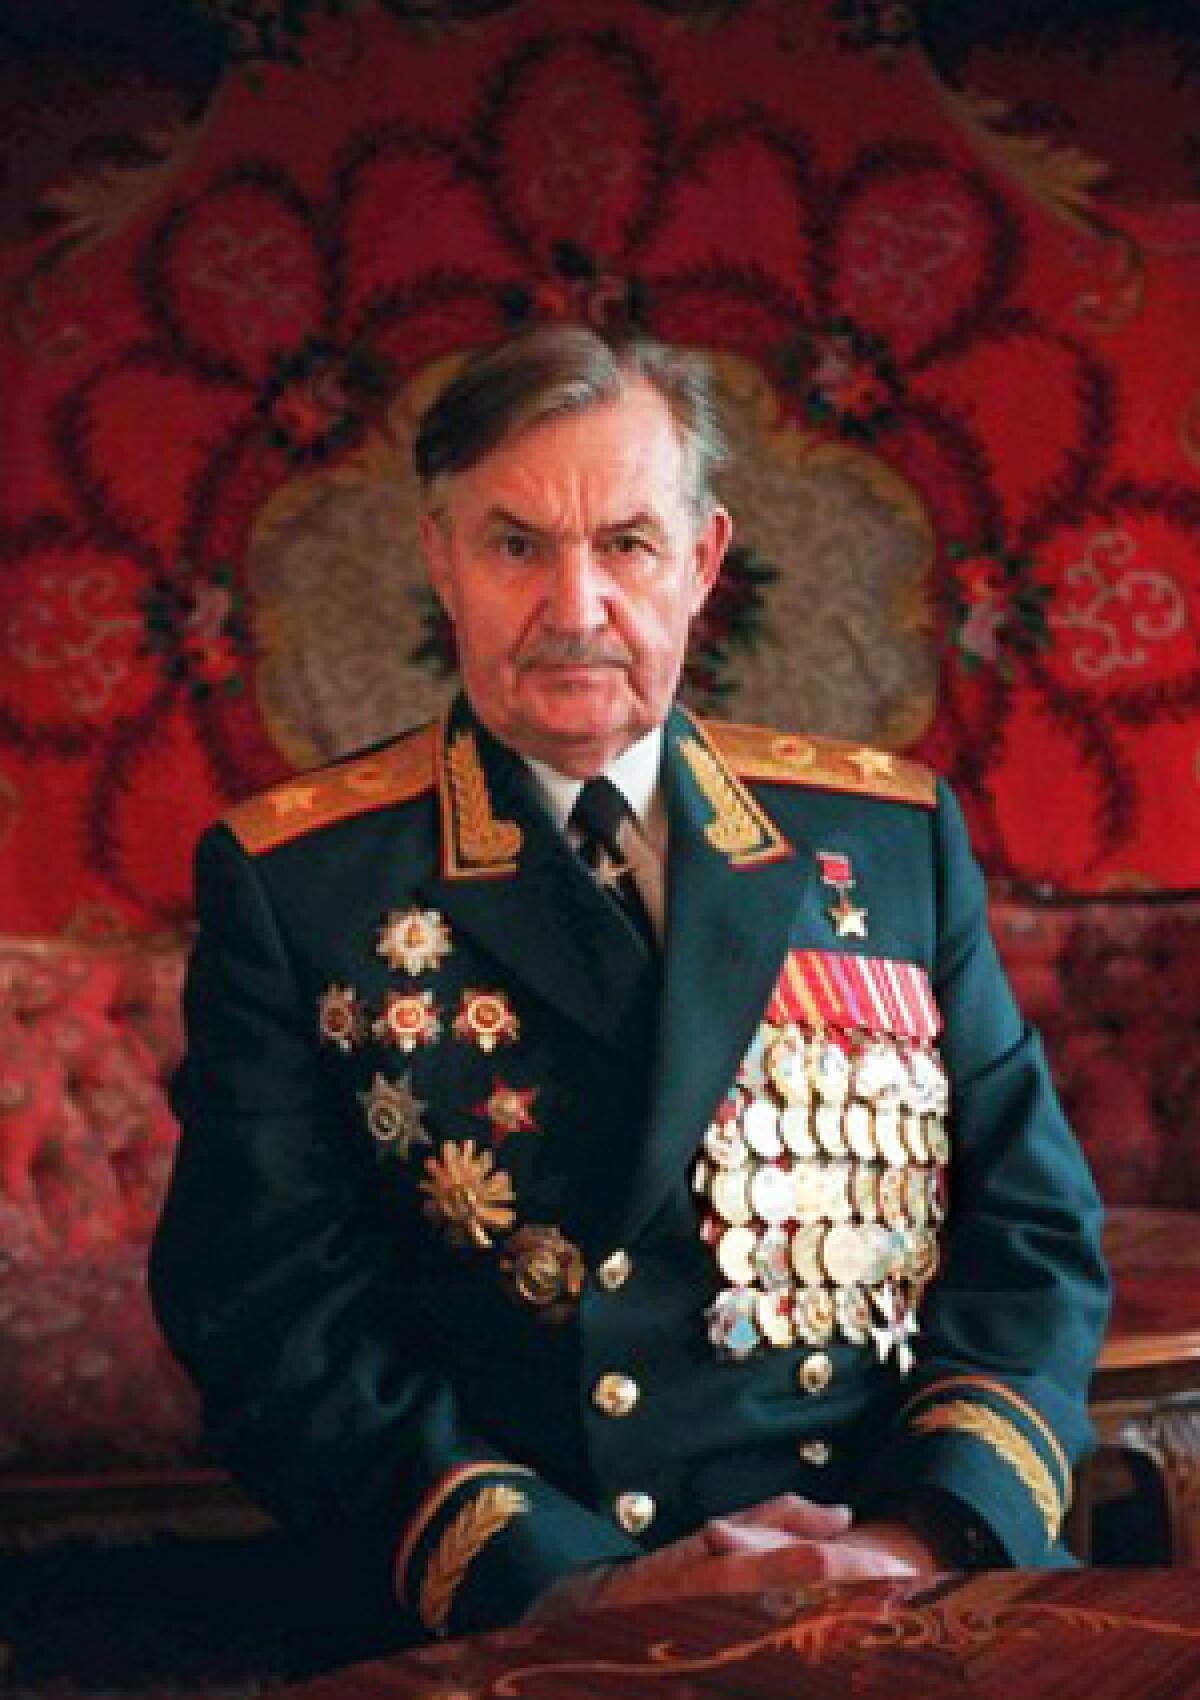 Gen. Valentin Varennikov became chief of Soviet ground troops in 1989. He enthusiastically supported the 1991 hard-line coup that briefly ousted Soviet President Mikhail Gorbachev and sped the fall of the Soviet Union.